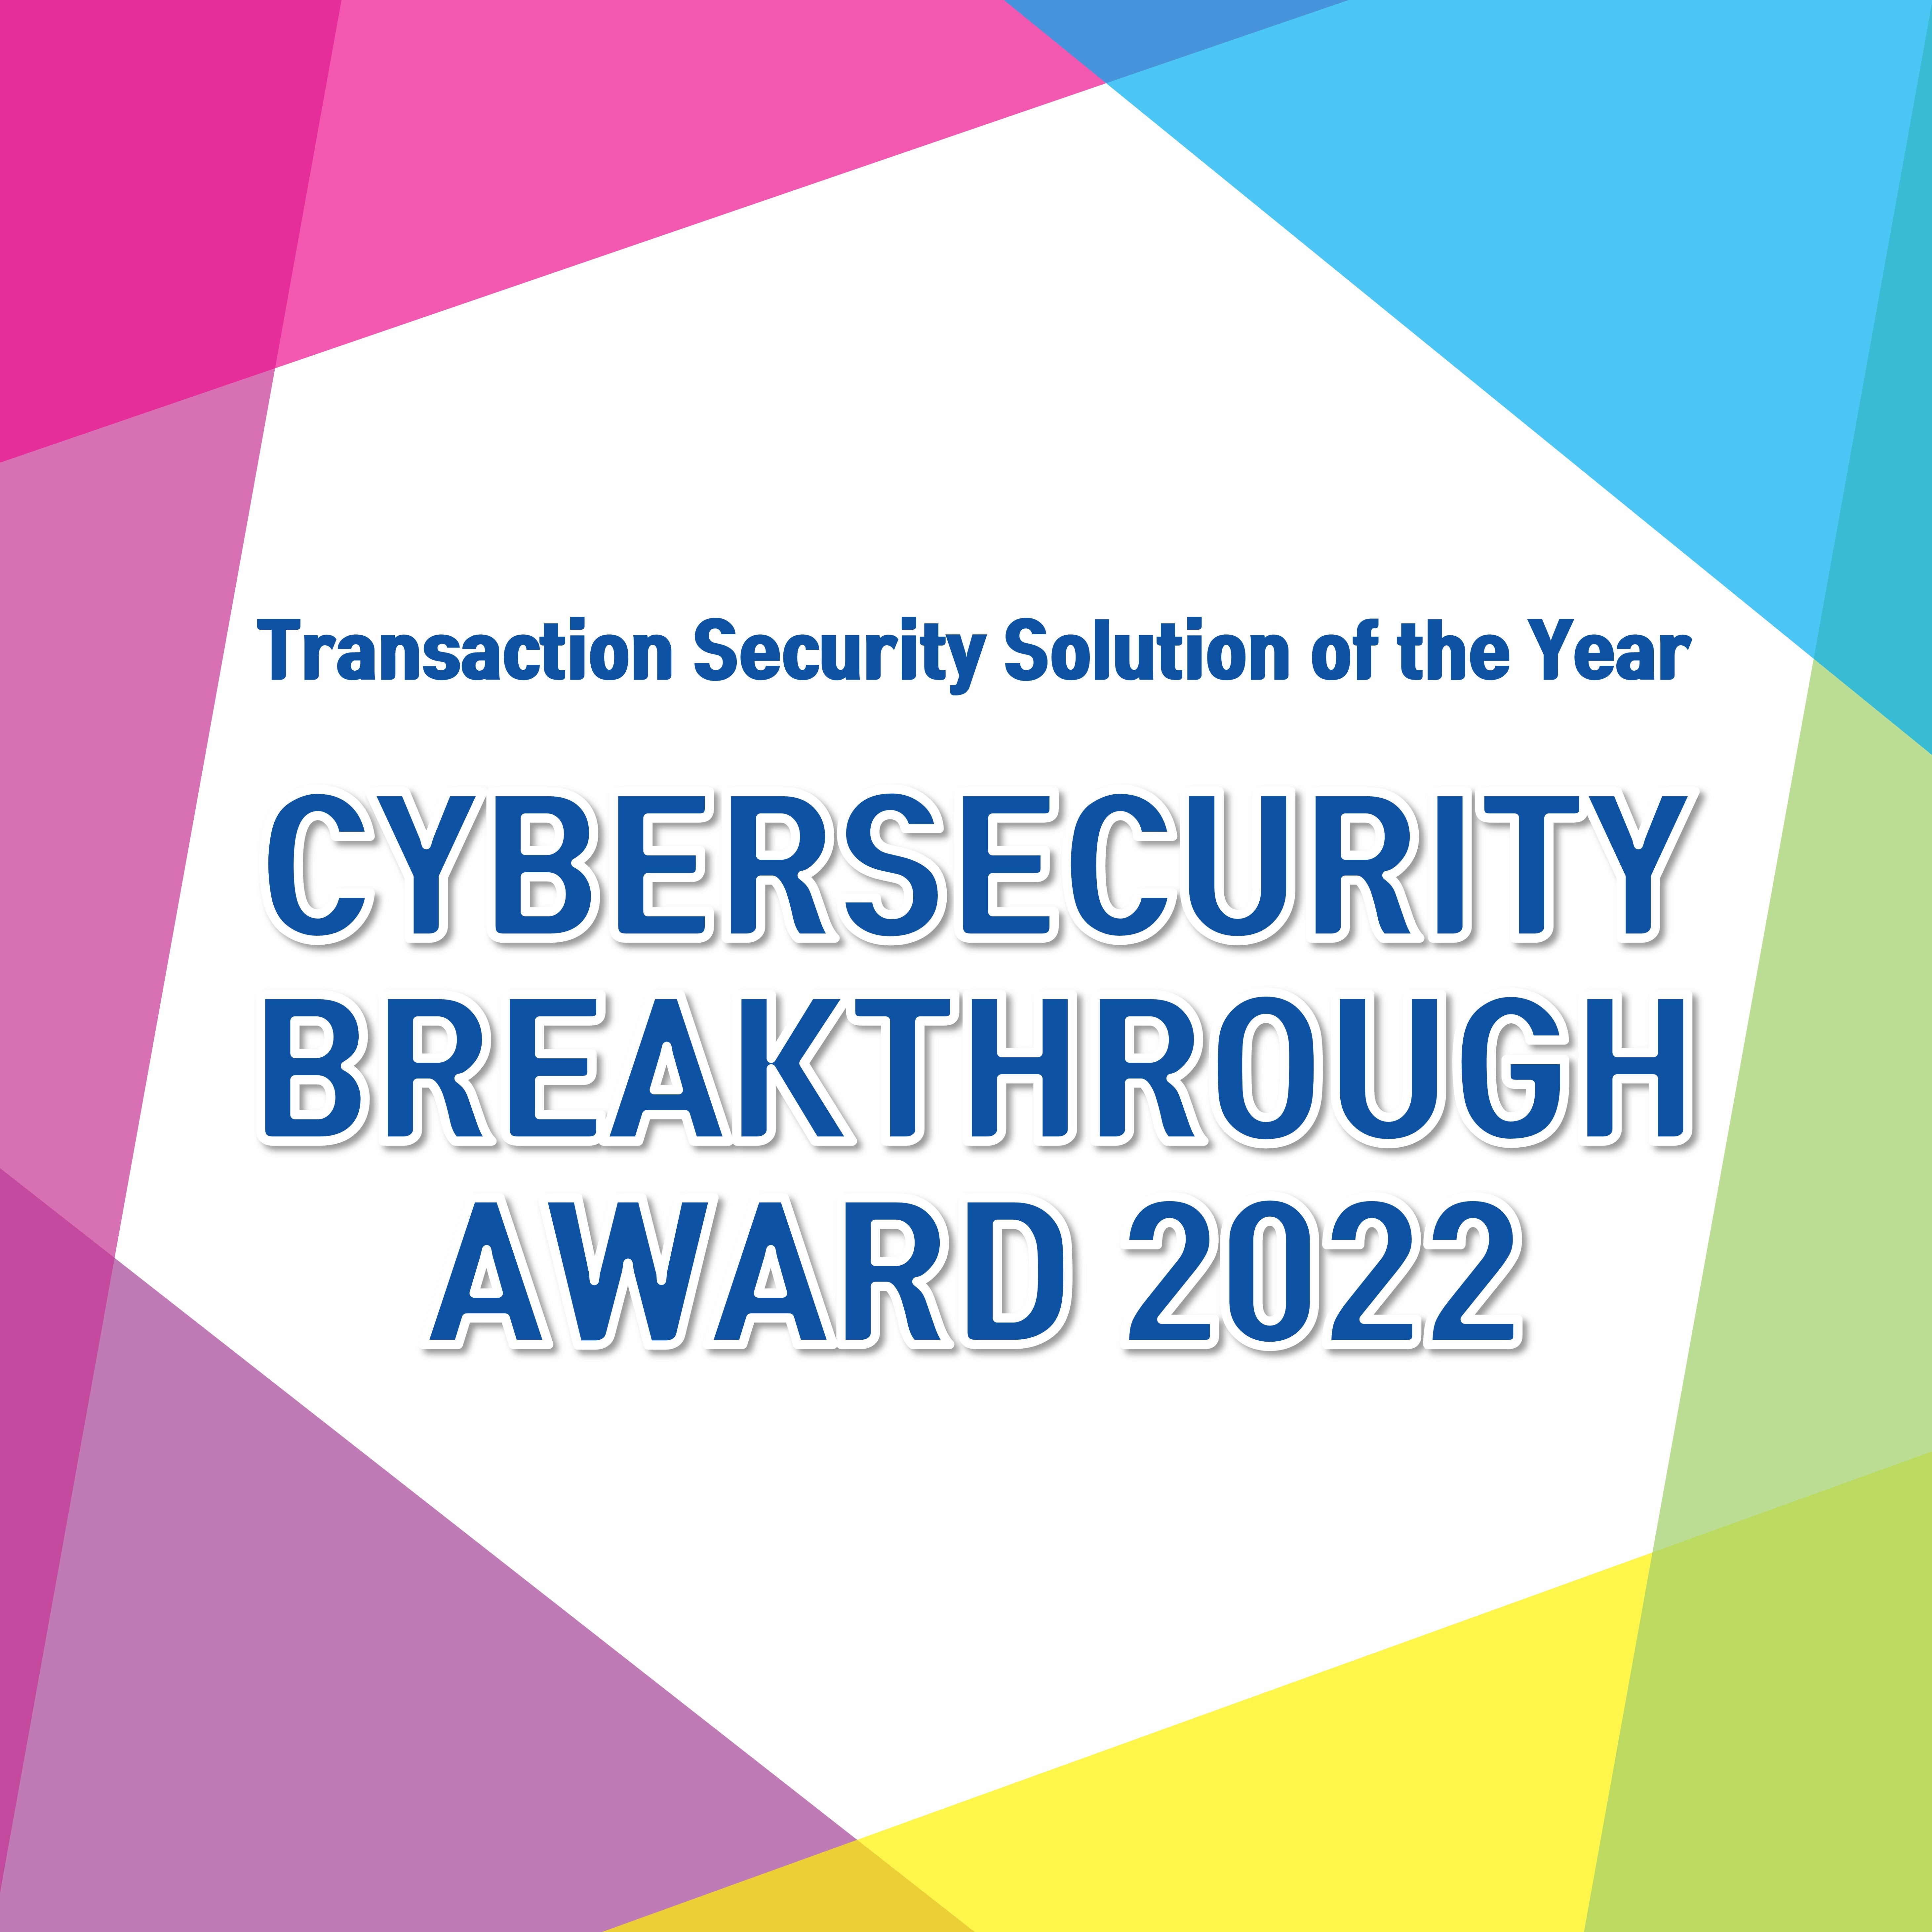 swIDch wins “Transaction Security Solution of the Year” at the CyberSecurity Breakthrough Awards 2022